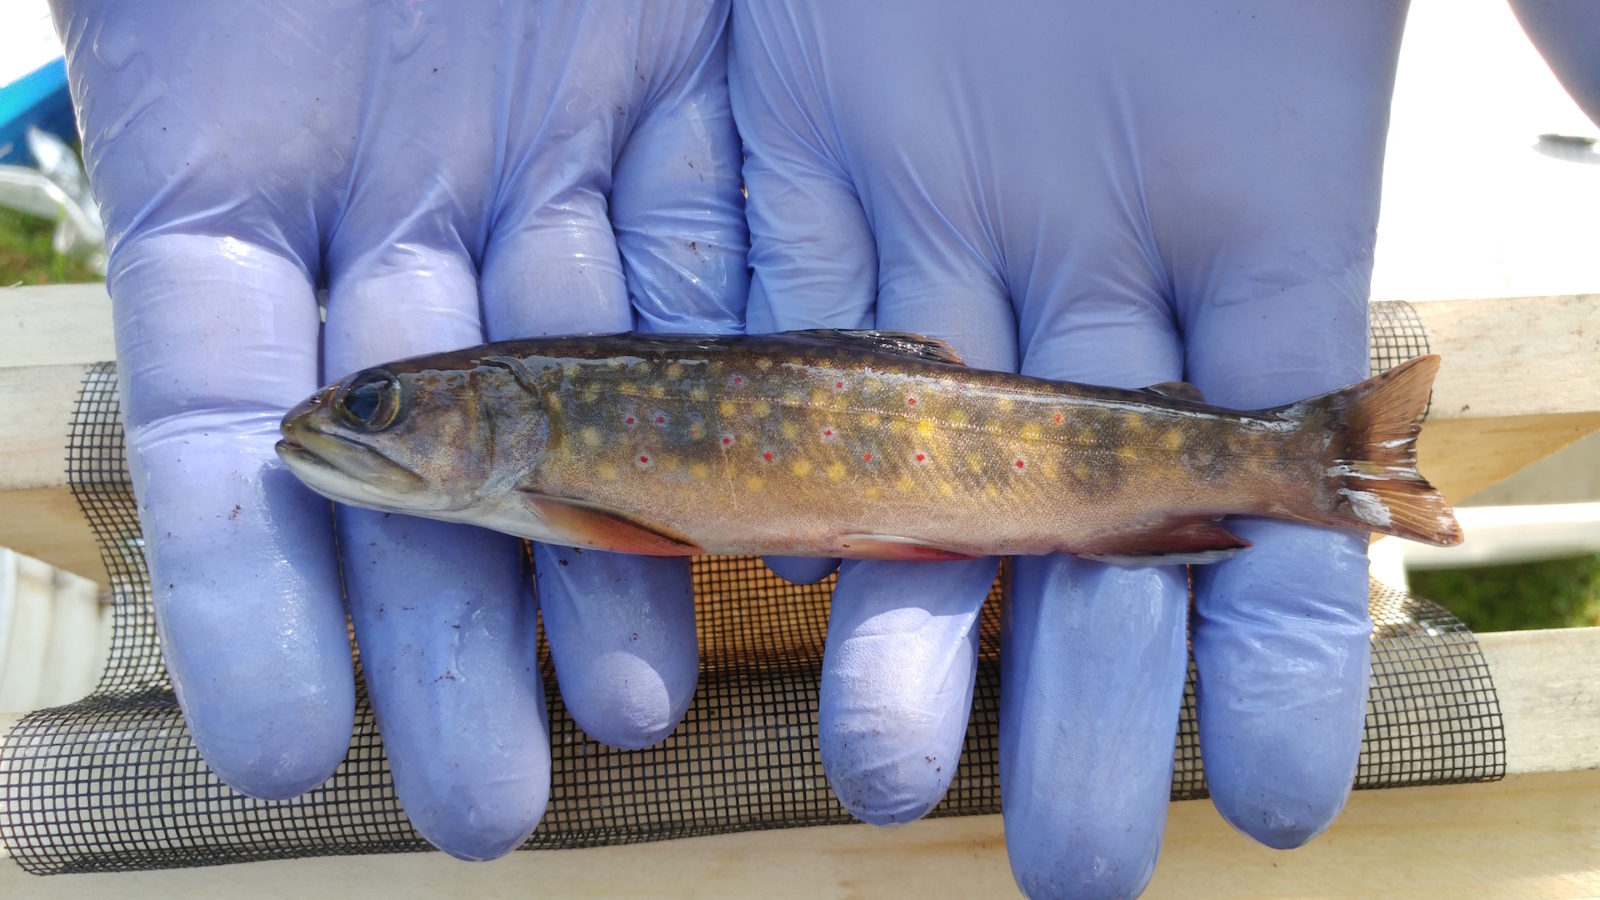 A juvenile brook trout laying across the researcher's blue latex gloved hands.